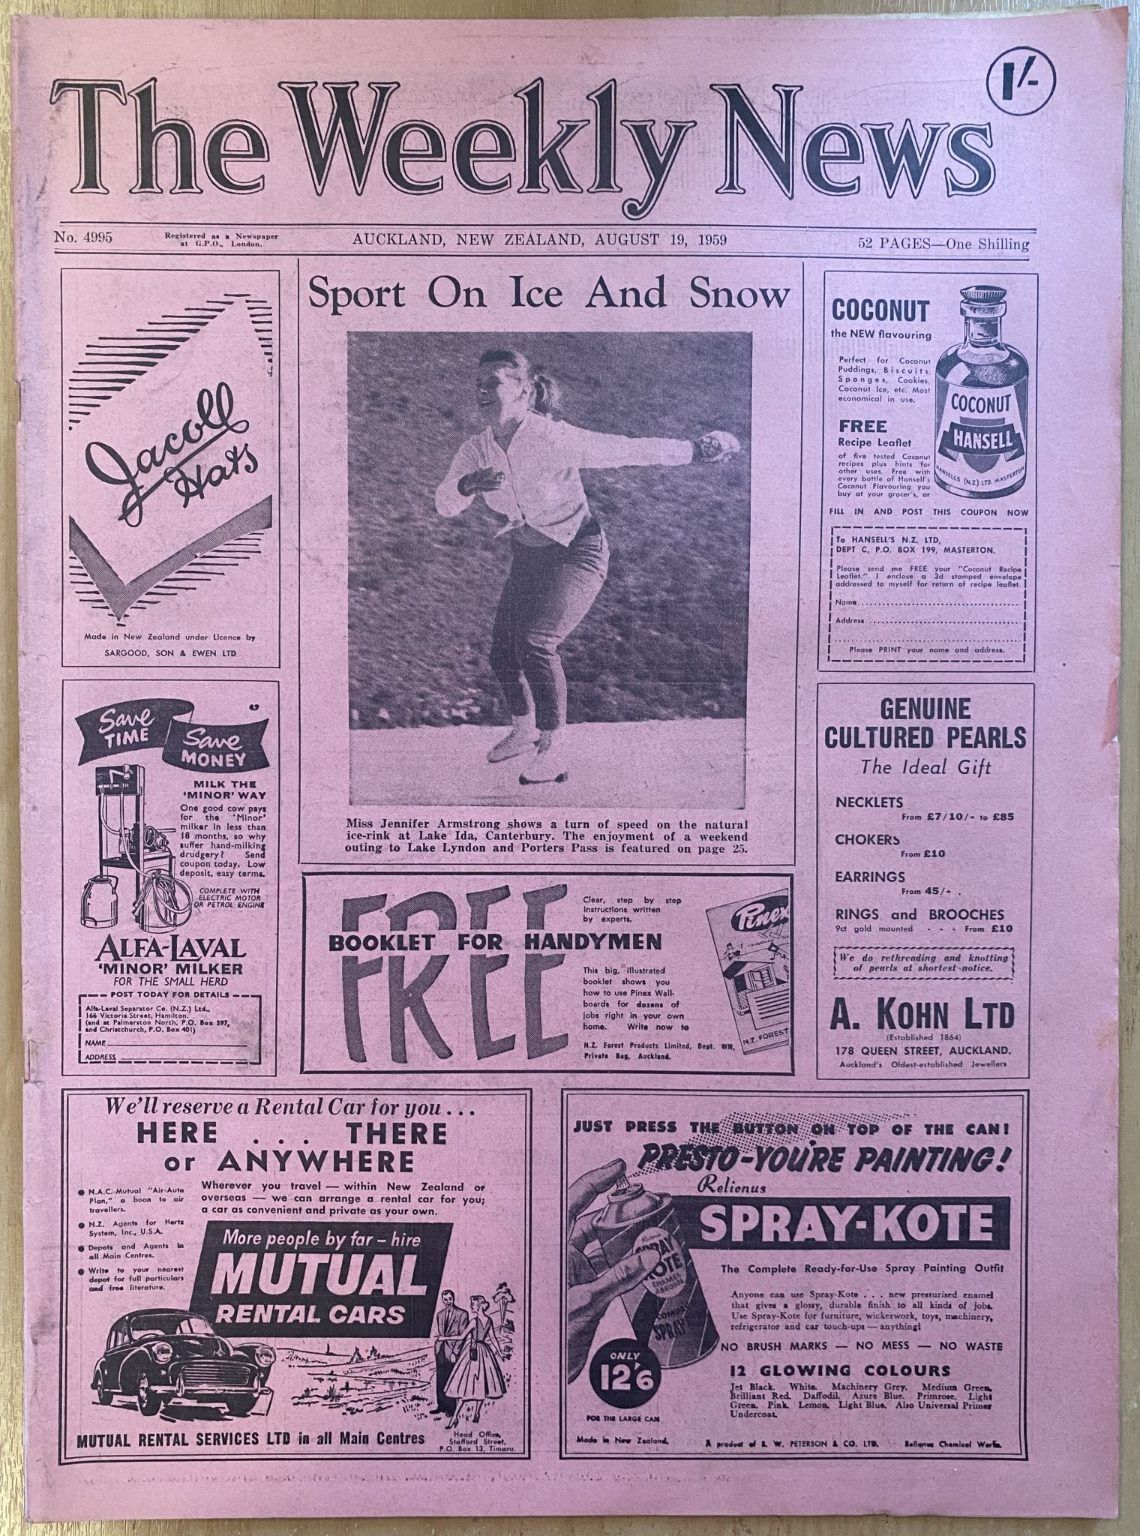 OLD NEWSPAPER: The Weekly News - No. 4995, 19 August 1959